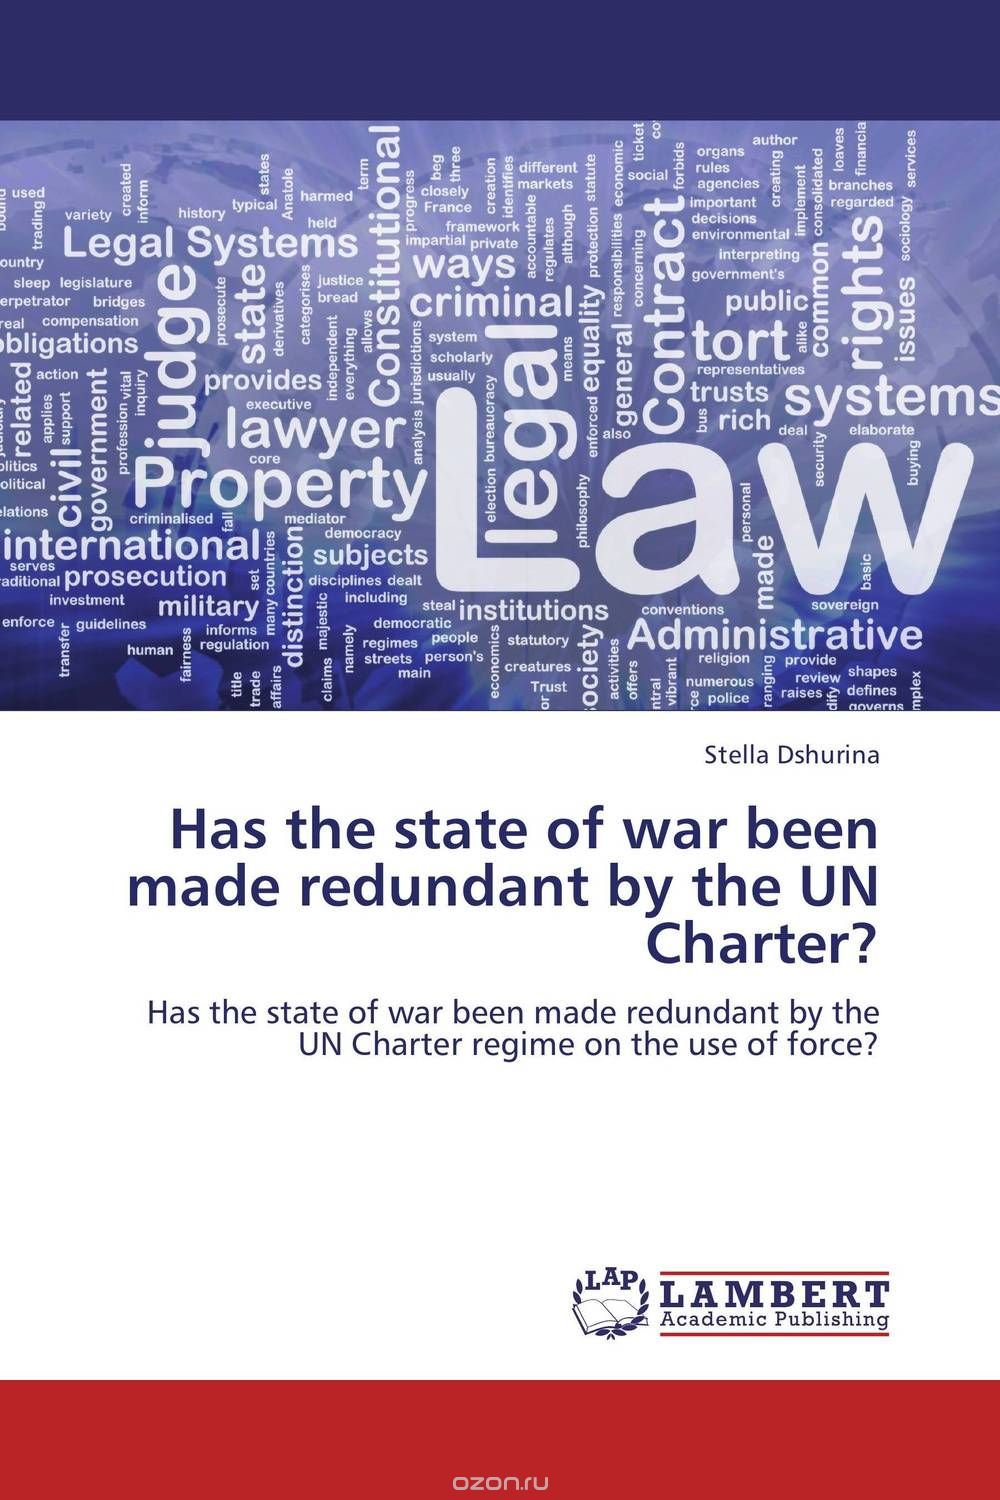 Has the state of war been made redundant by the UN Charter?